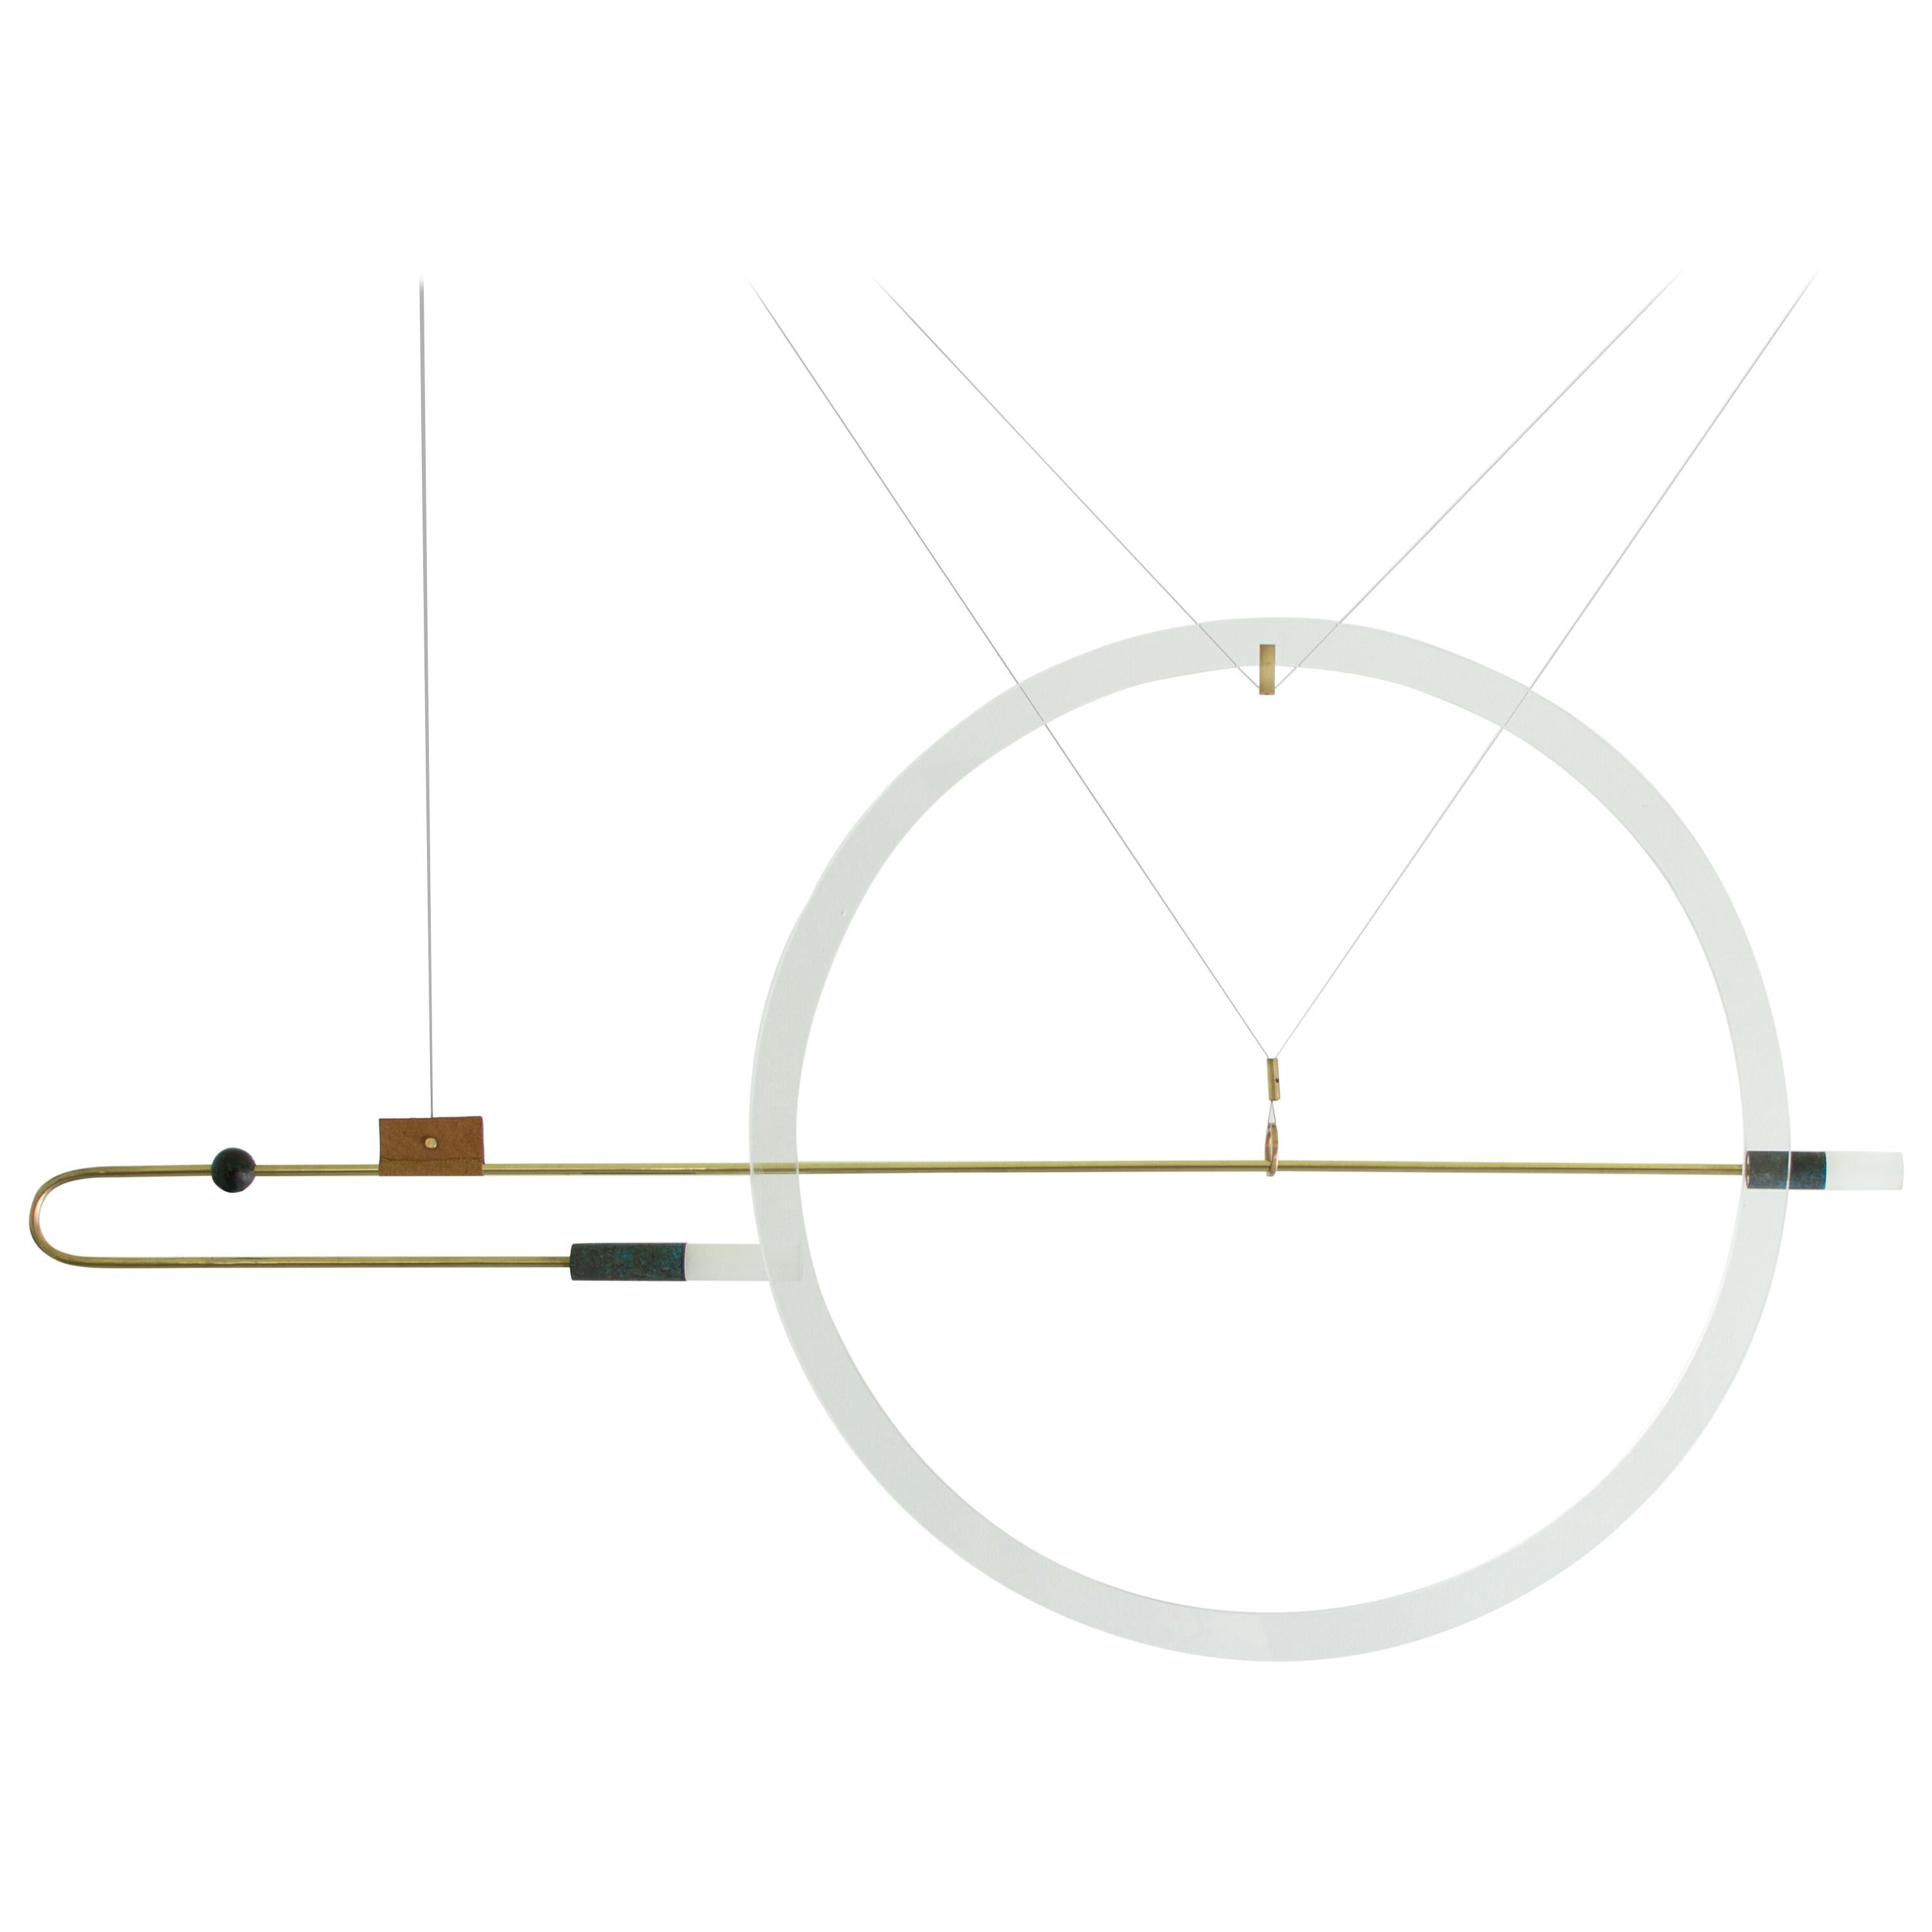 Sculpted light suspension - Portraits -Opus X – Periclis Frementitis.

Materials: solid brass (aged & polished) curved with fire on hand, bronze parts, handcrafted glass, handcrafted leather, acrylic parts, 12V LED

Dimensions: W 125 cm x H 65